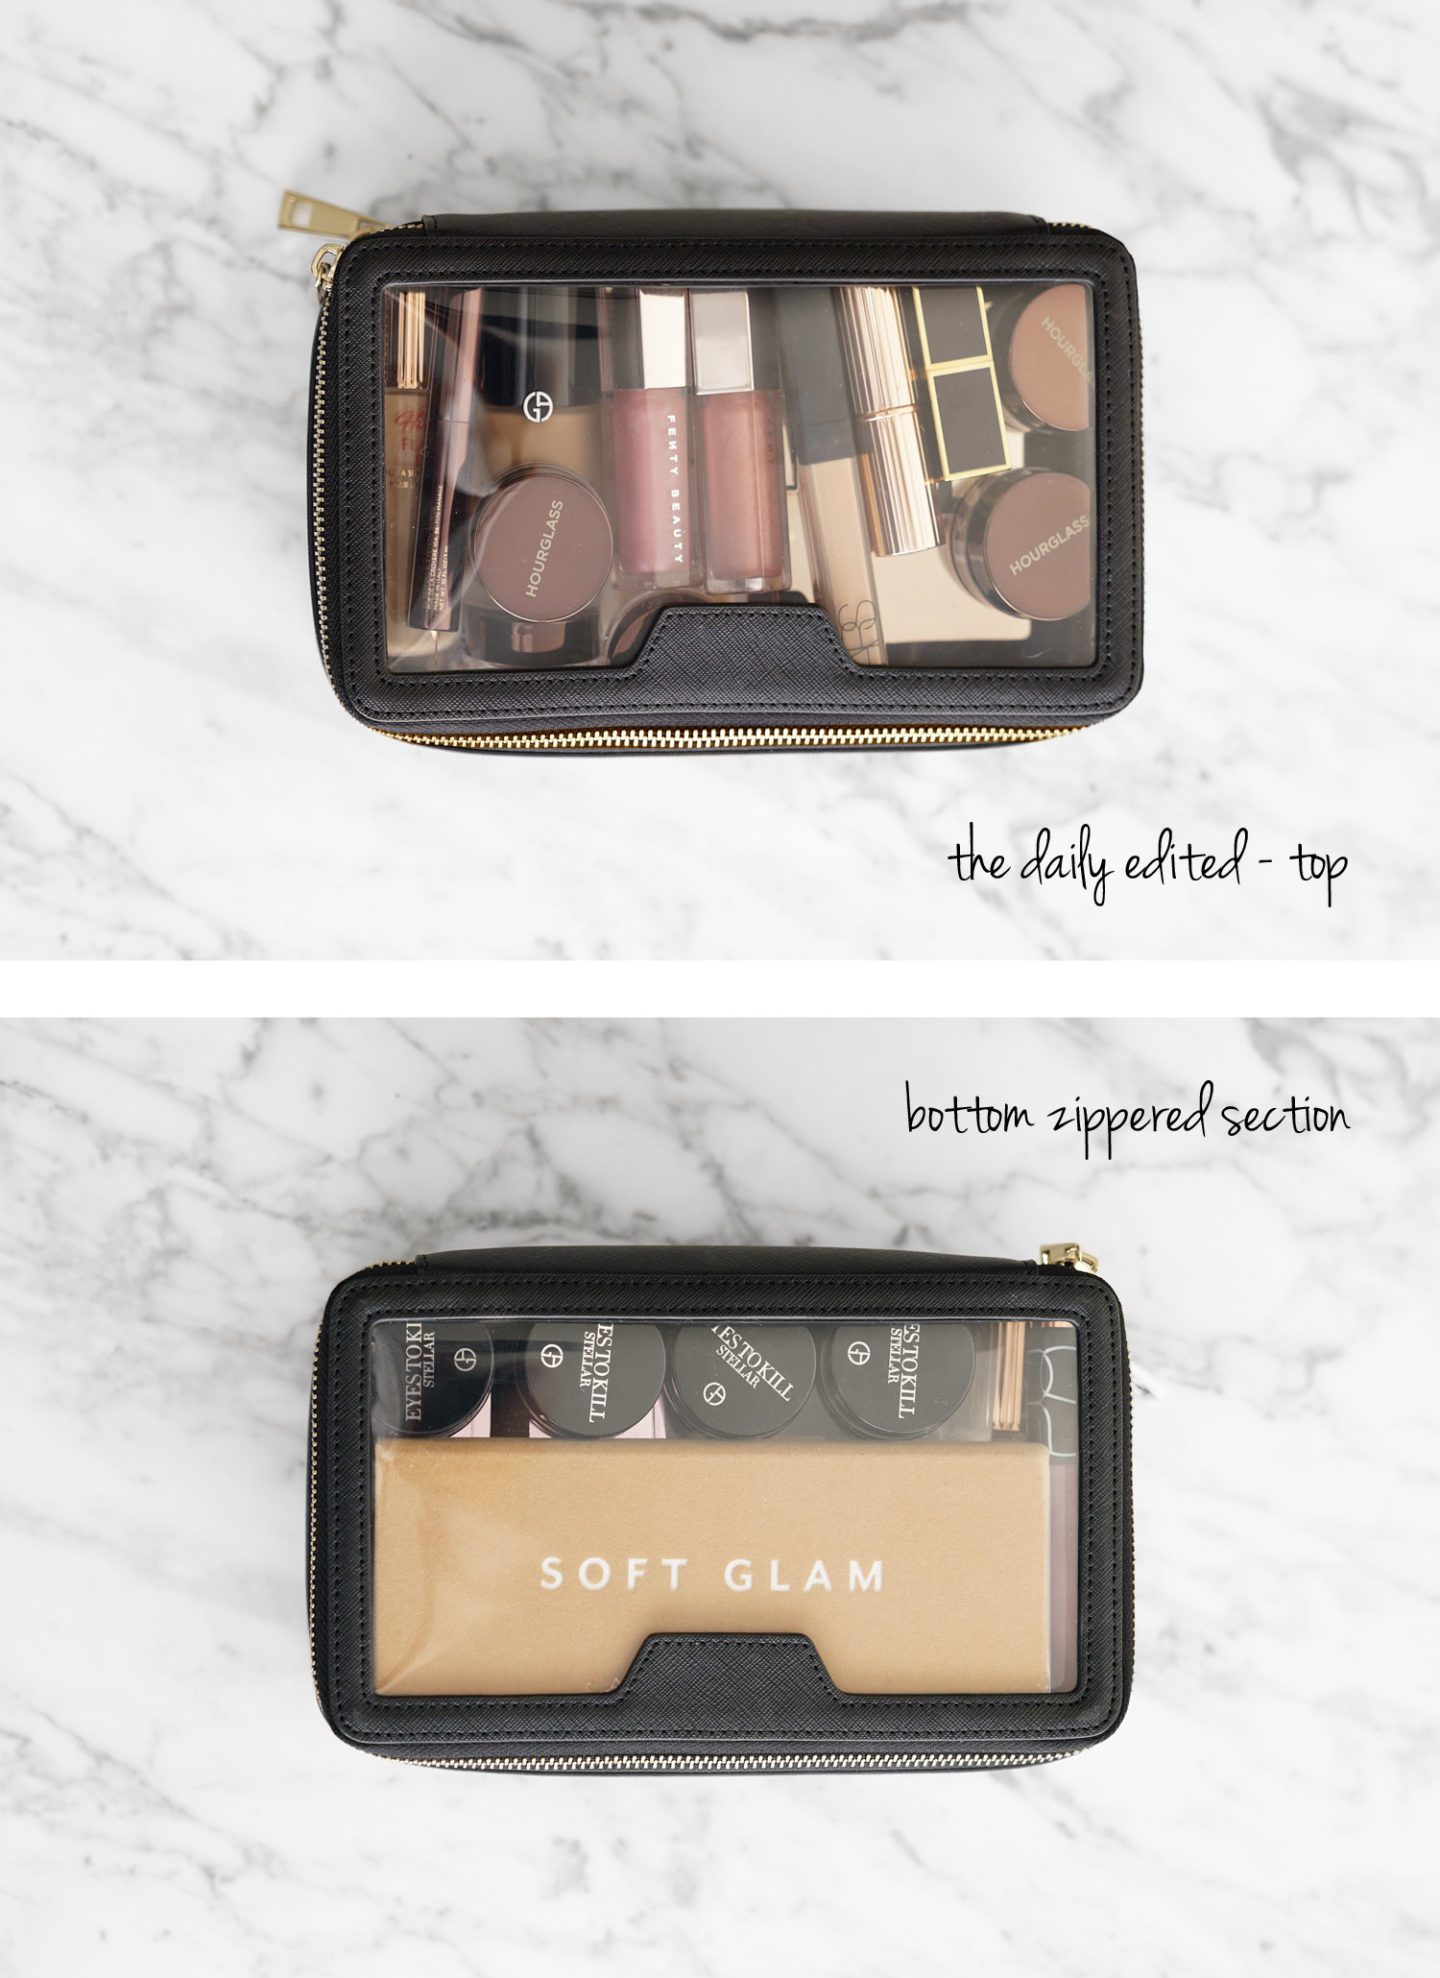 Travel Makeup Favorites in The Daily Edited Transparent Case